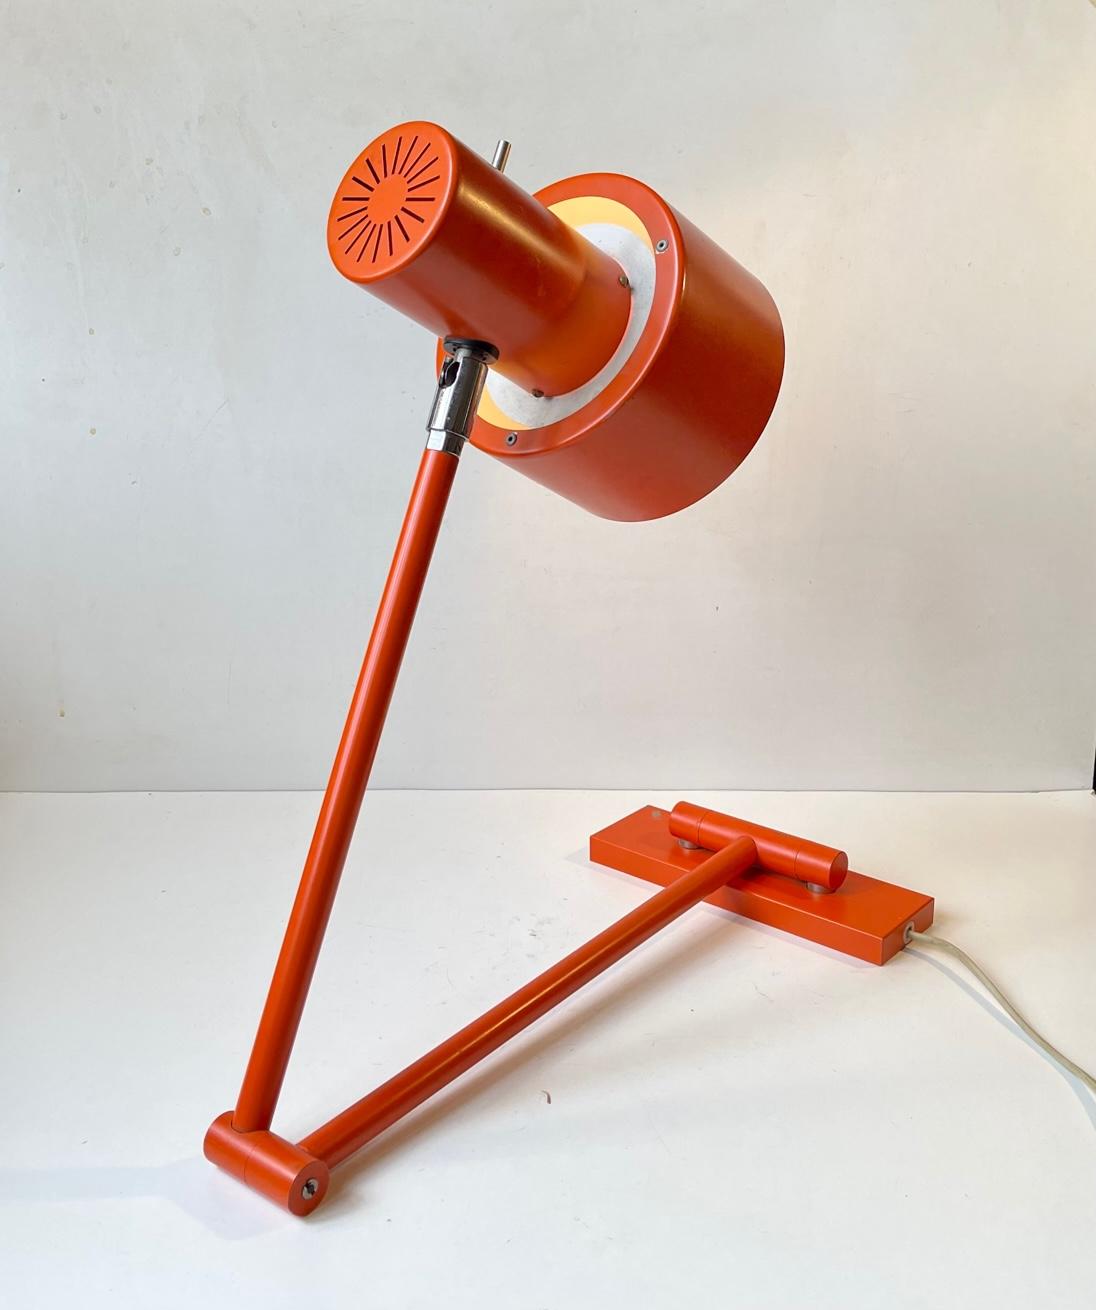 A rare swing arm wall sconce or table lamp in its original orange color. It is called Skala and was designed in 1969 by Jo Hammerborg and manufactured by Fog & Mørup in Denmark from 1969-75. Its a very versatile light suitable for a desk lamp,